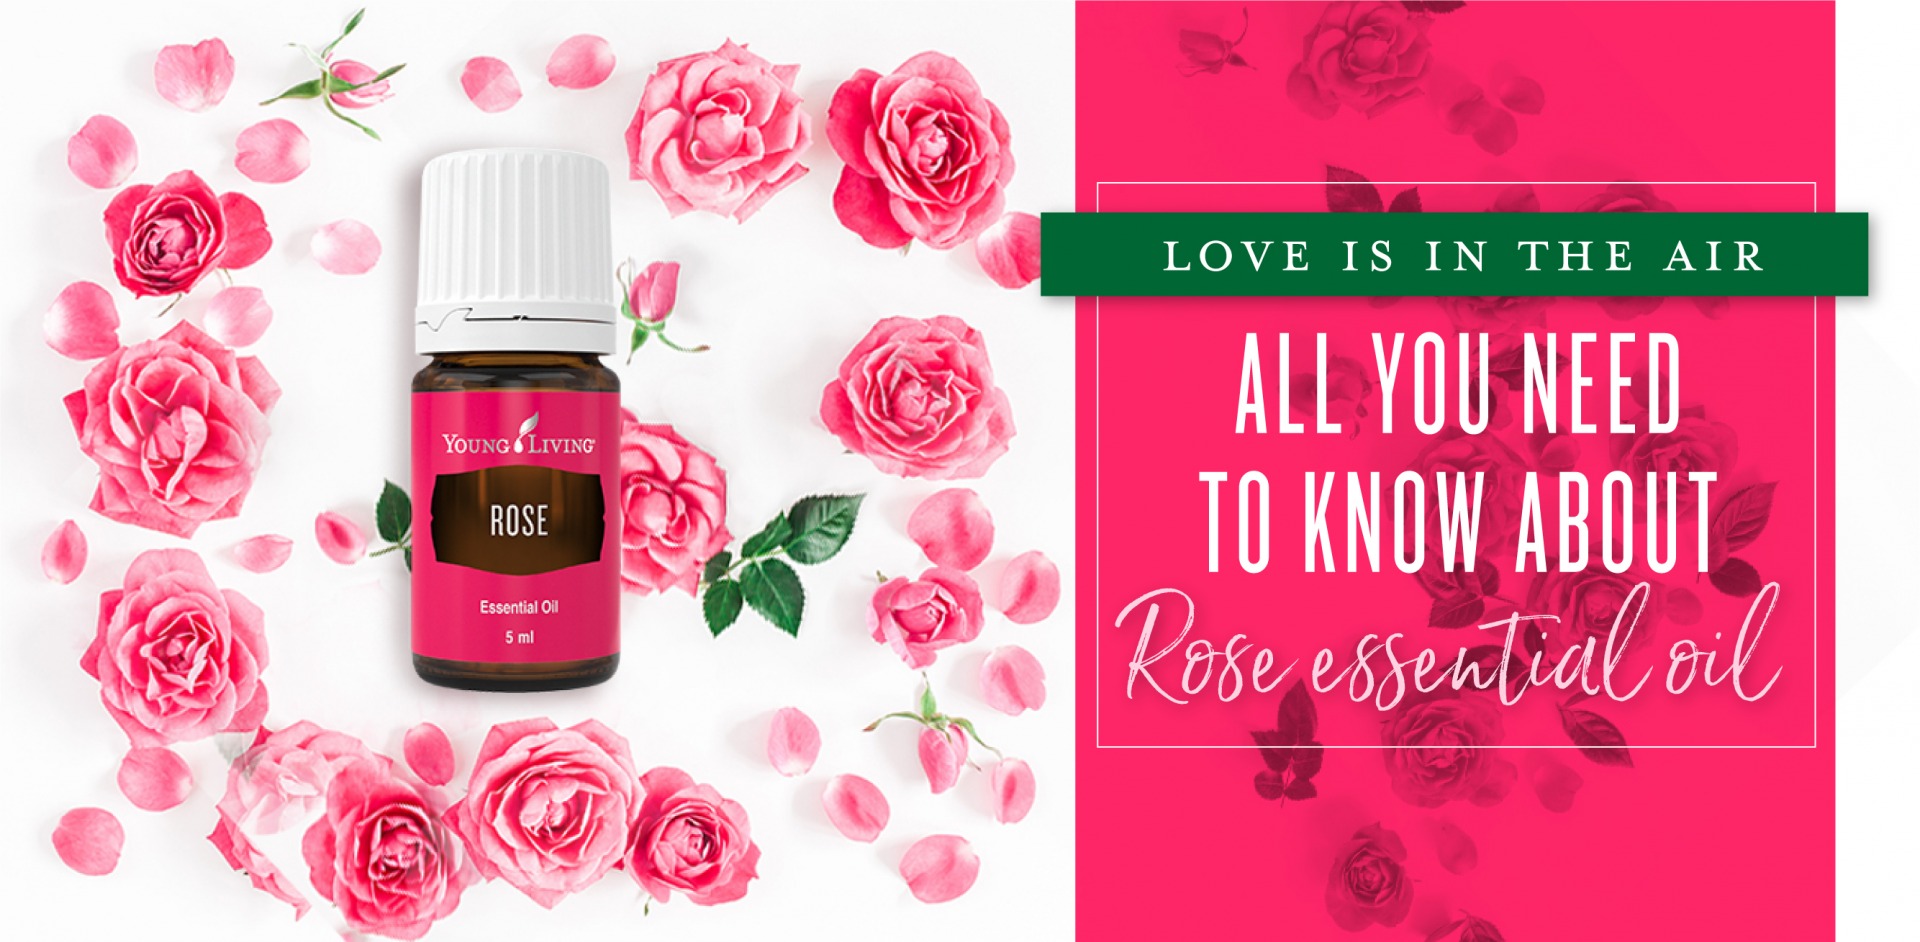 All you need to know about Rose essential oil - Young Living Blog